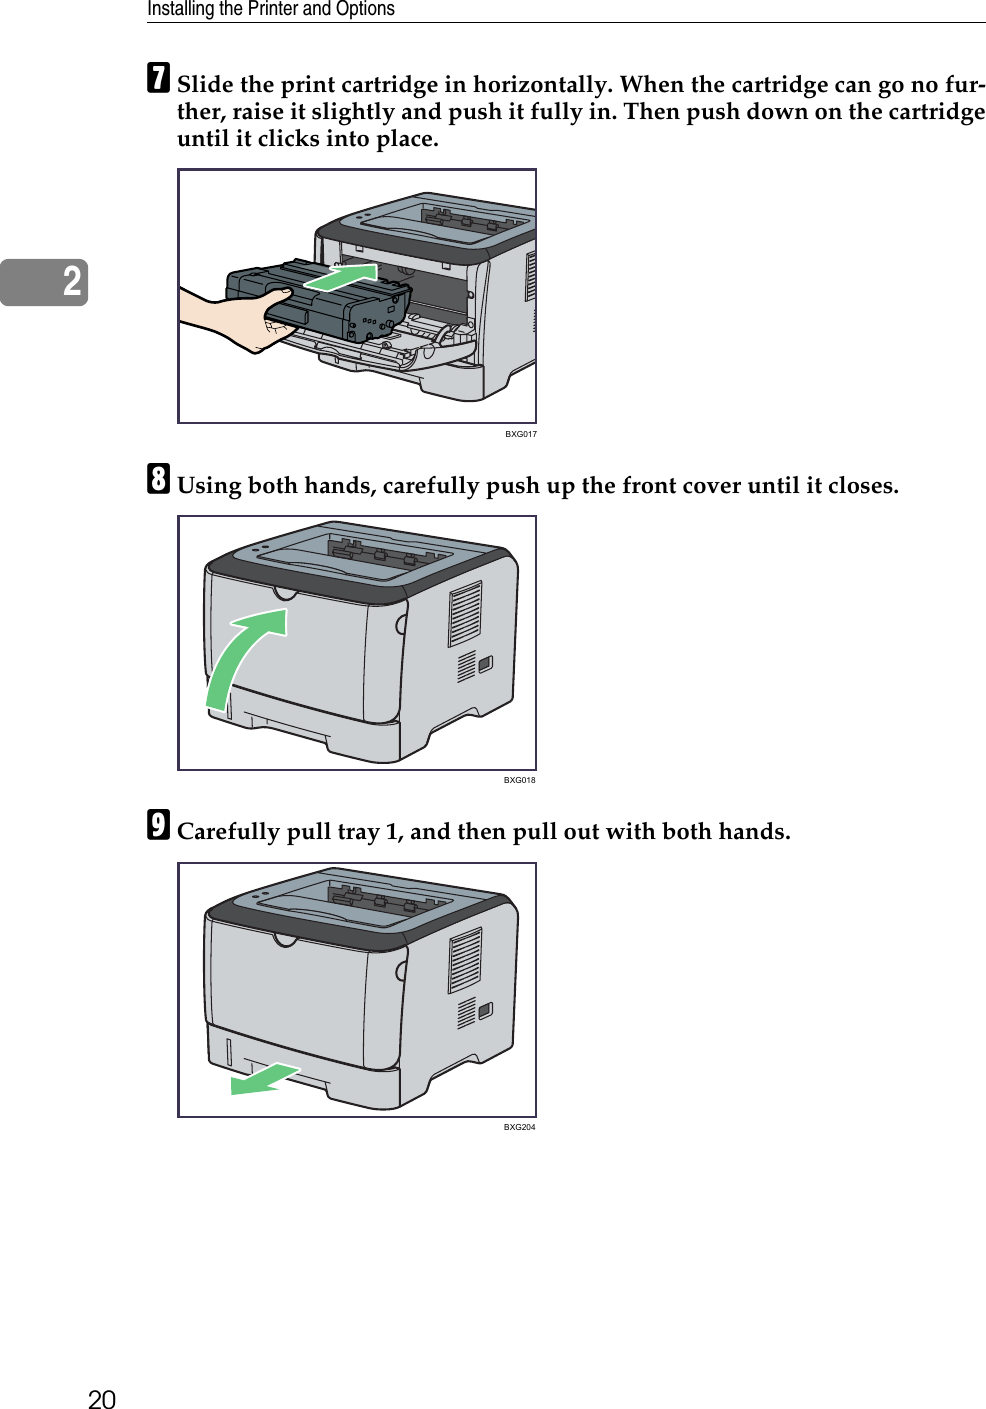 Installing the Printer and Options202GSlide the print cartridge in horizontally. When the cartridge can go no fur-ther, raise it slightly and push it fully in. Then push down on the cartridgeuntil it clicks into place.HUsing both hands, carefully push up the front cover until it closes.ICarefully pull tray 1, and then pull out with both hands.BXG017BXG018BXG204